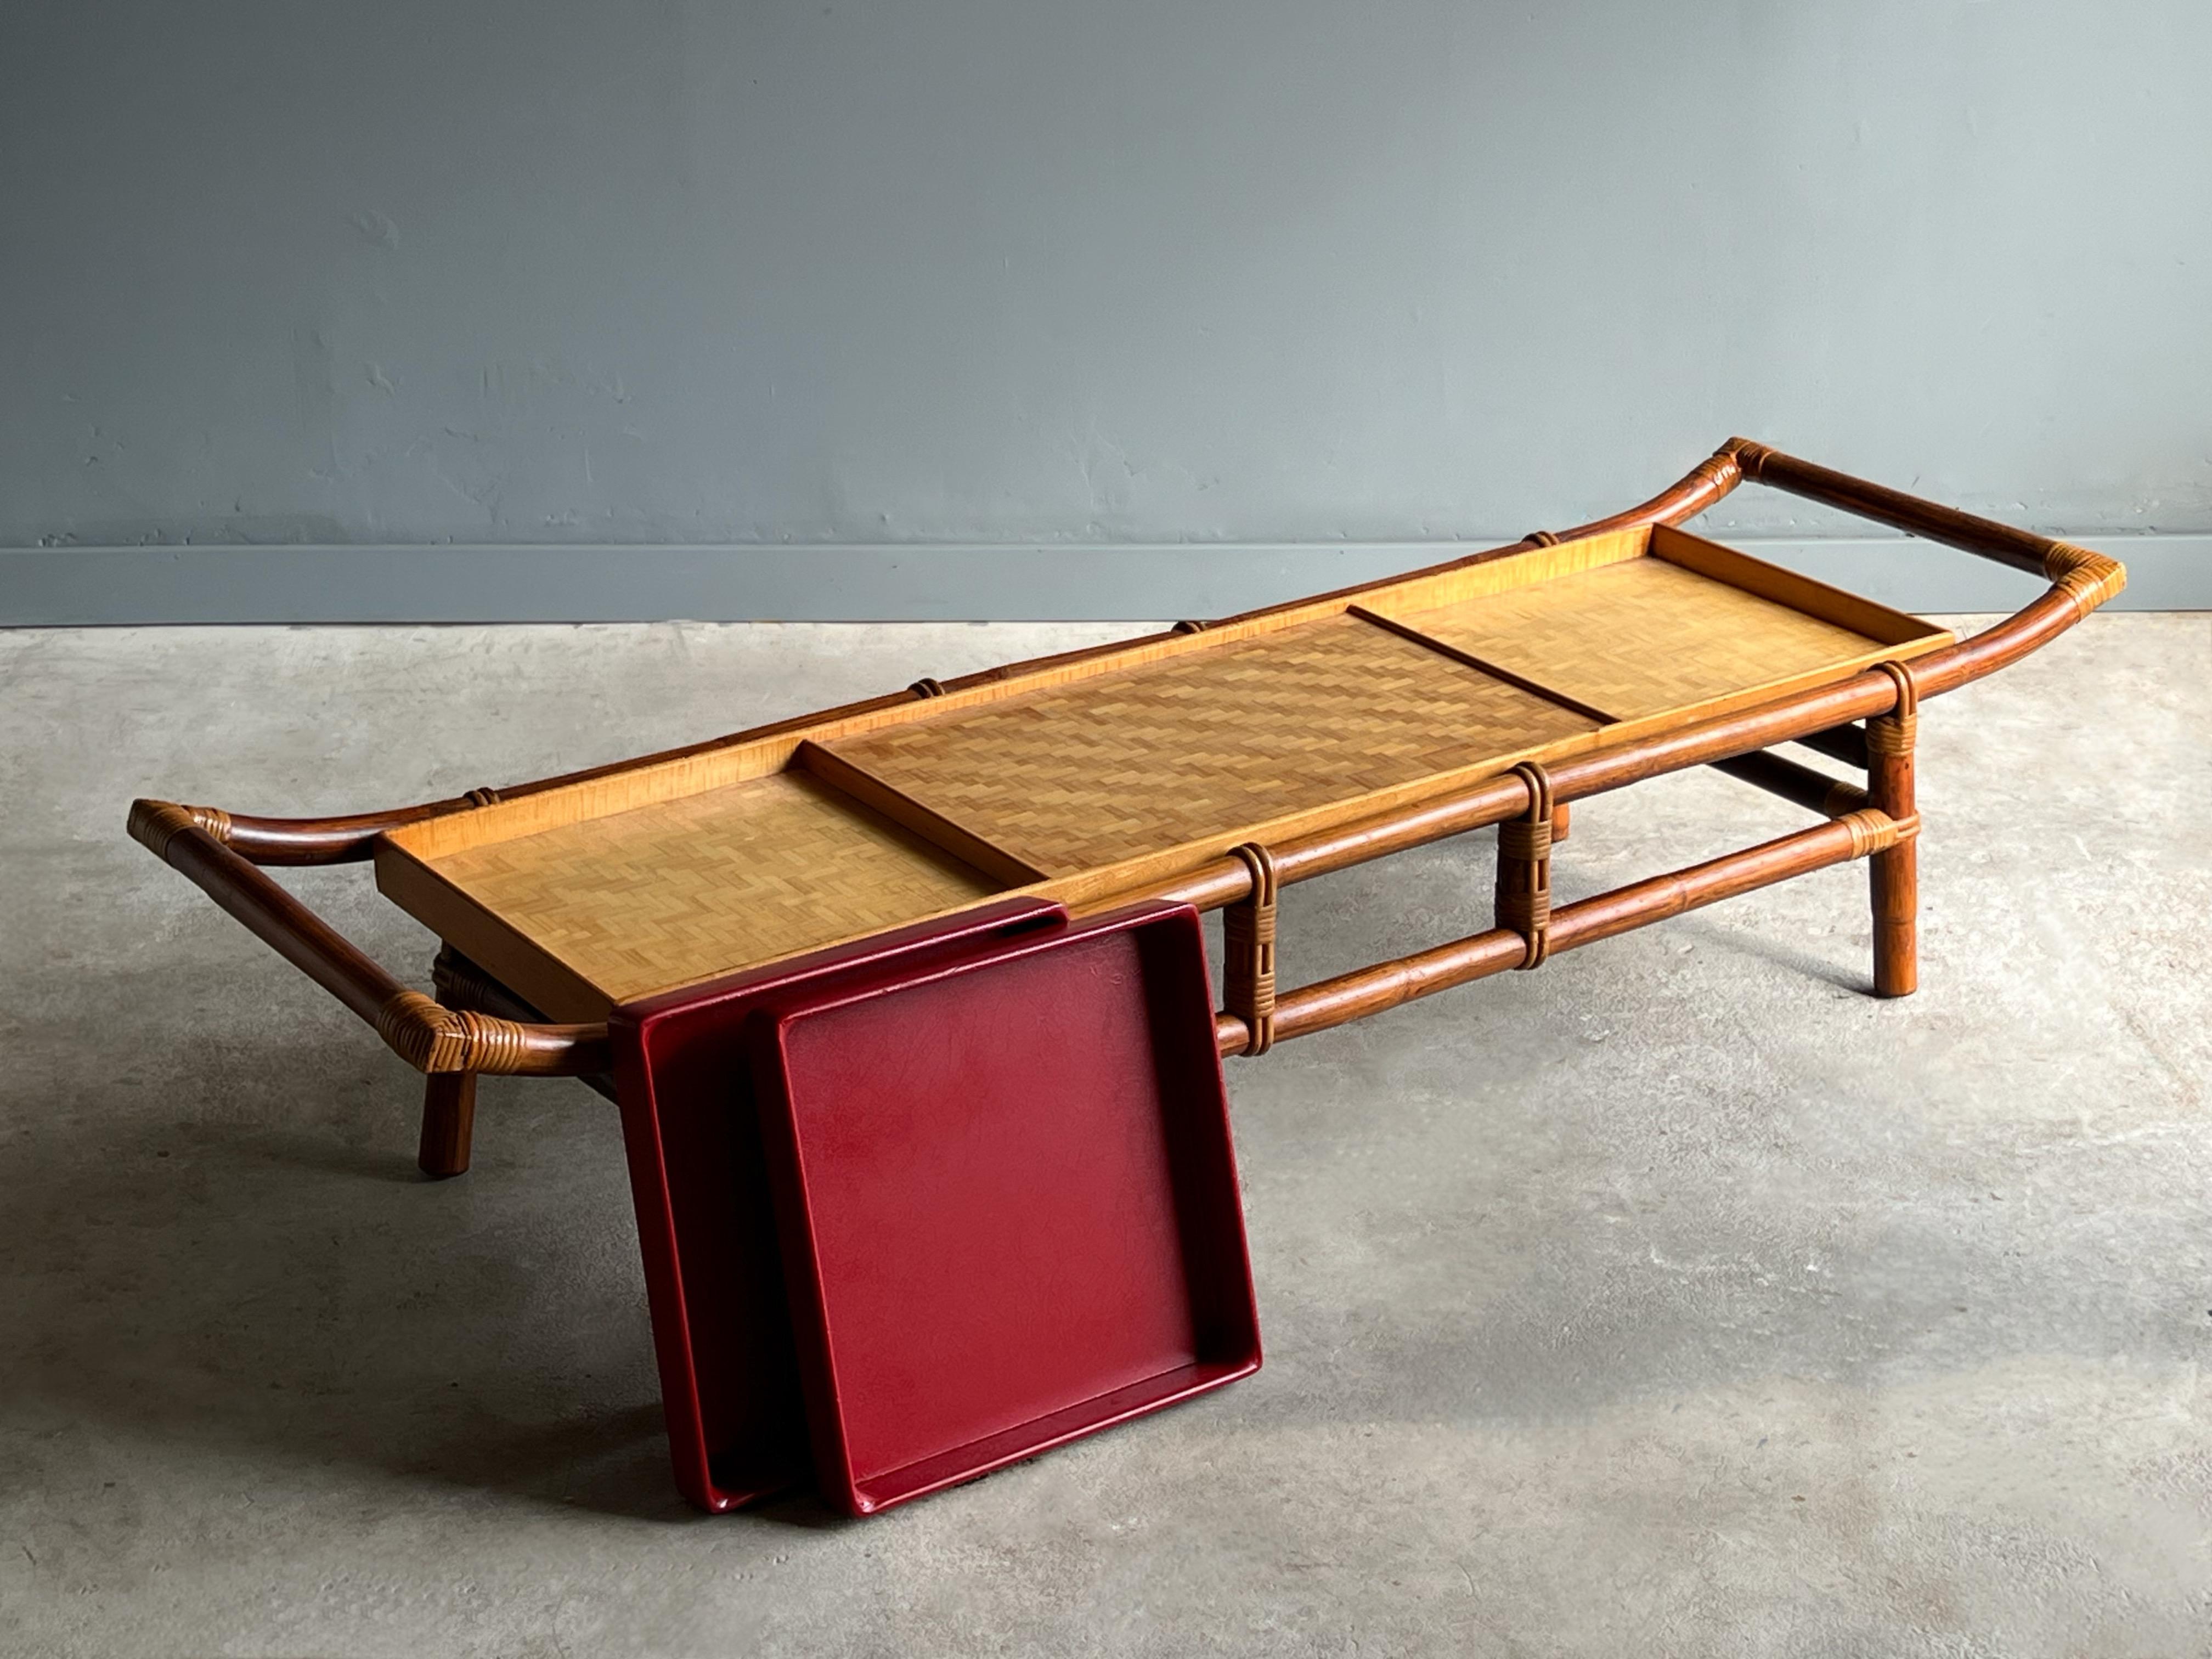 Mid-20th Century John Wisner for Ficks Reed Coffee Table or Bench, Bamboo and Cane, Circa 1954